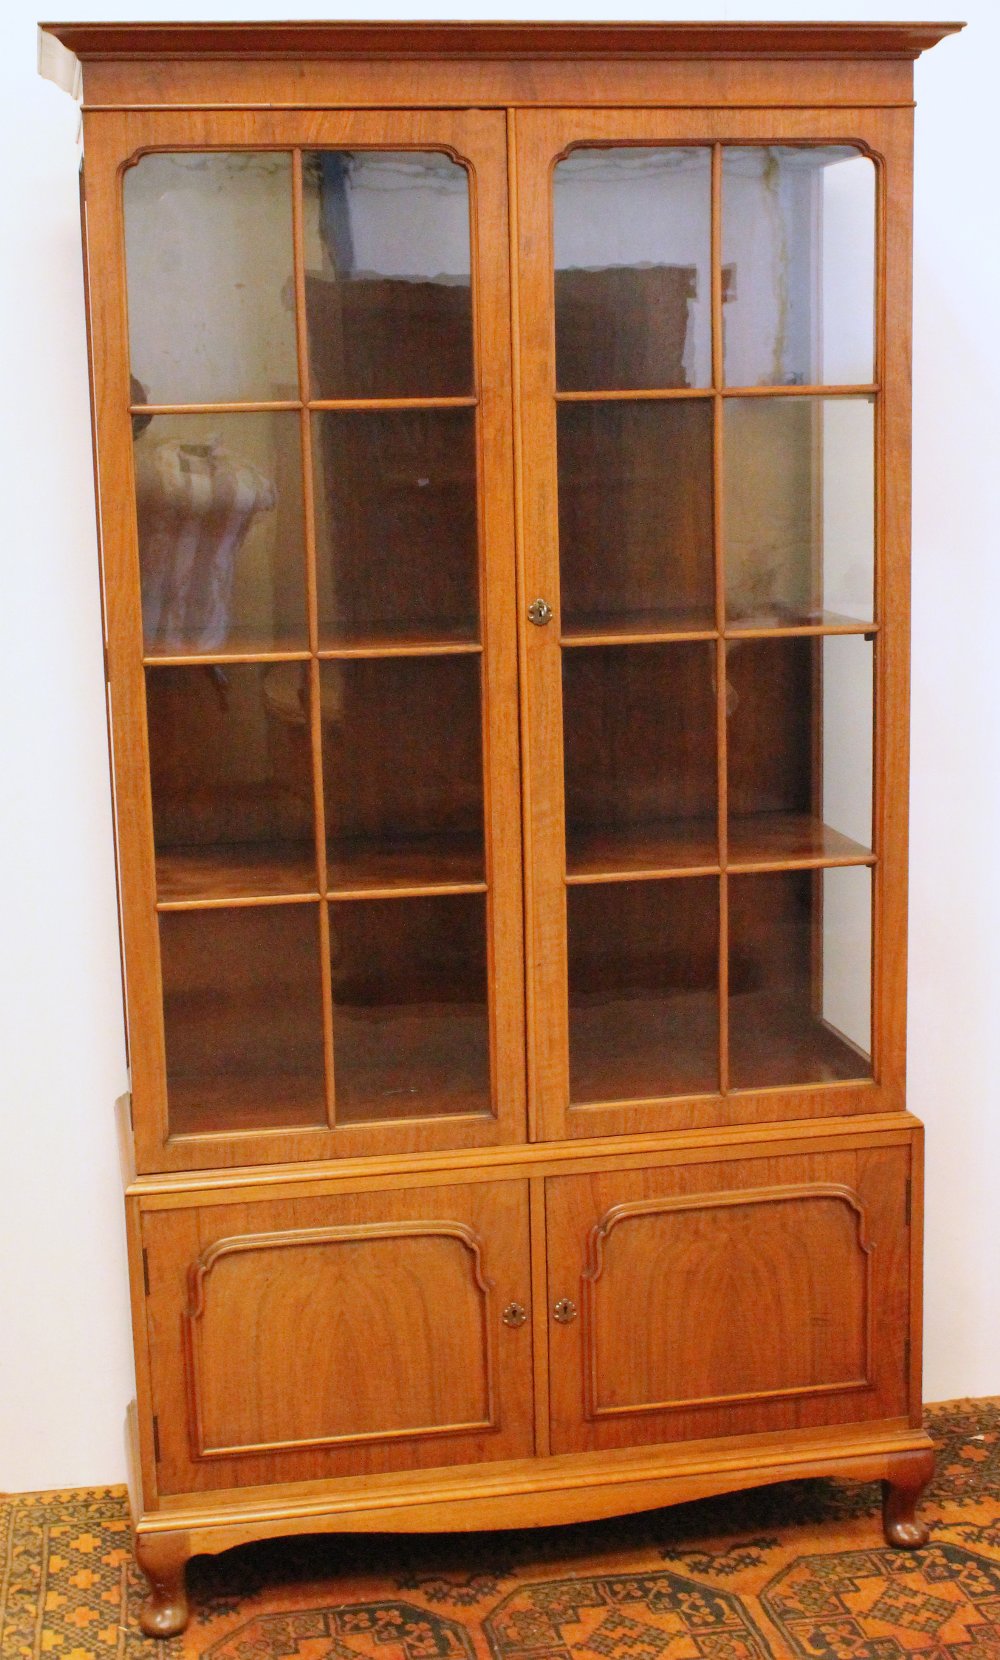 Early 20th century walnut display cabinet in the Whytock & Reid manner with moulded cornice above